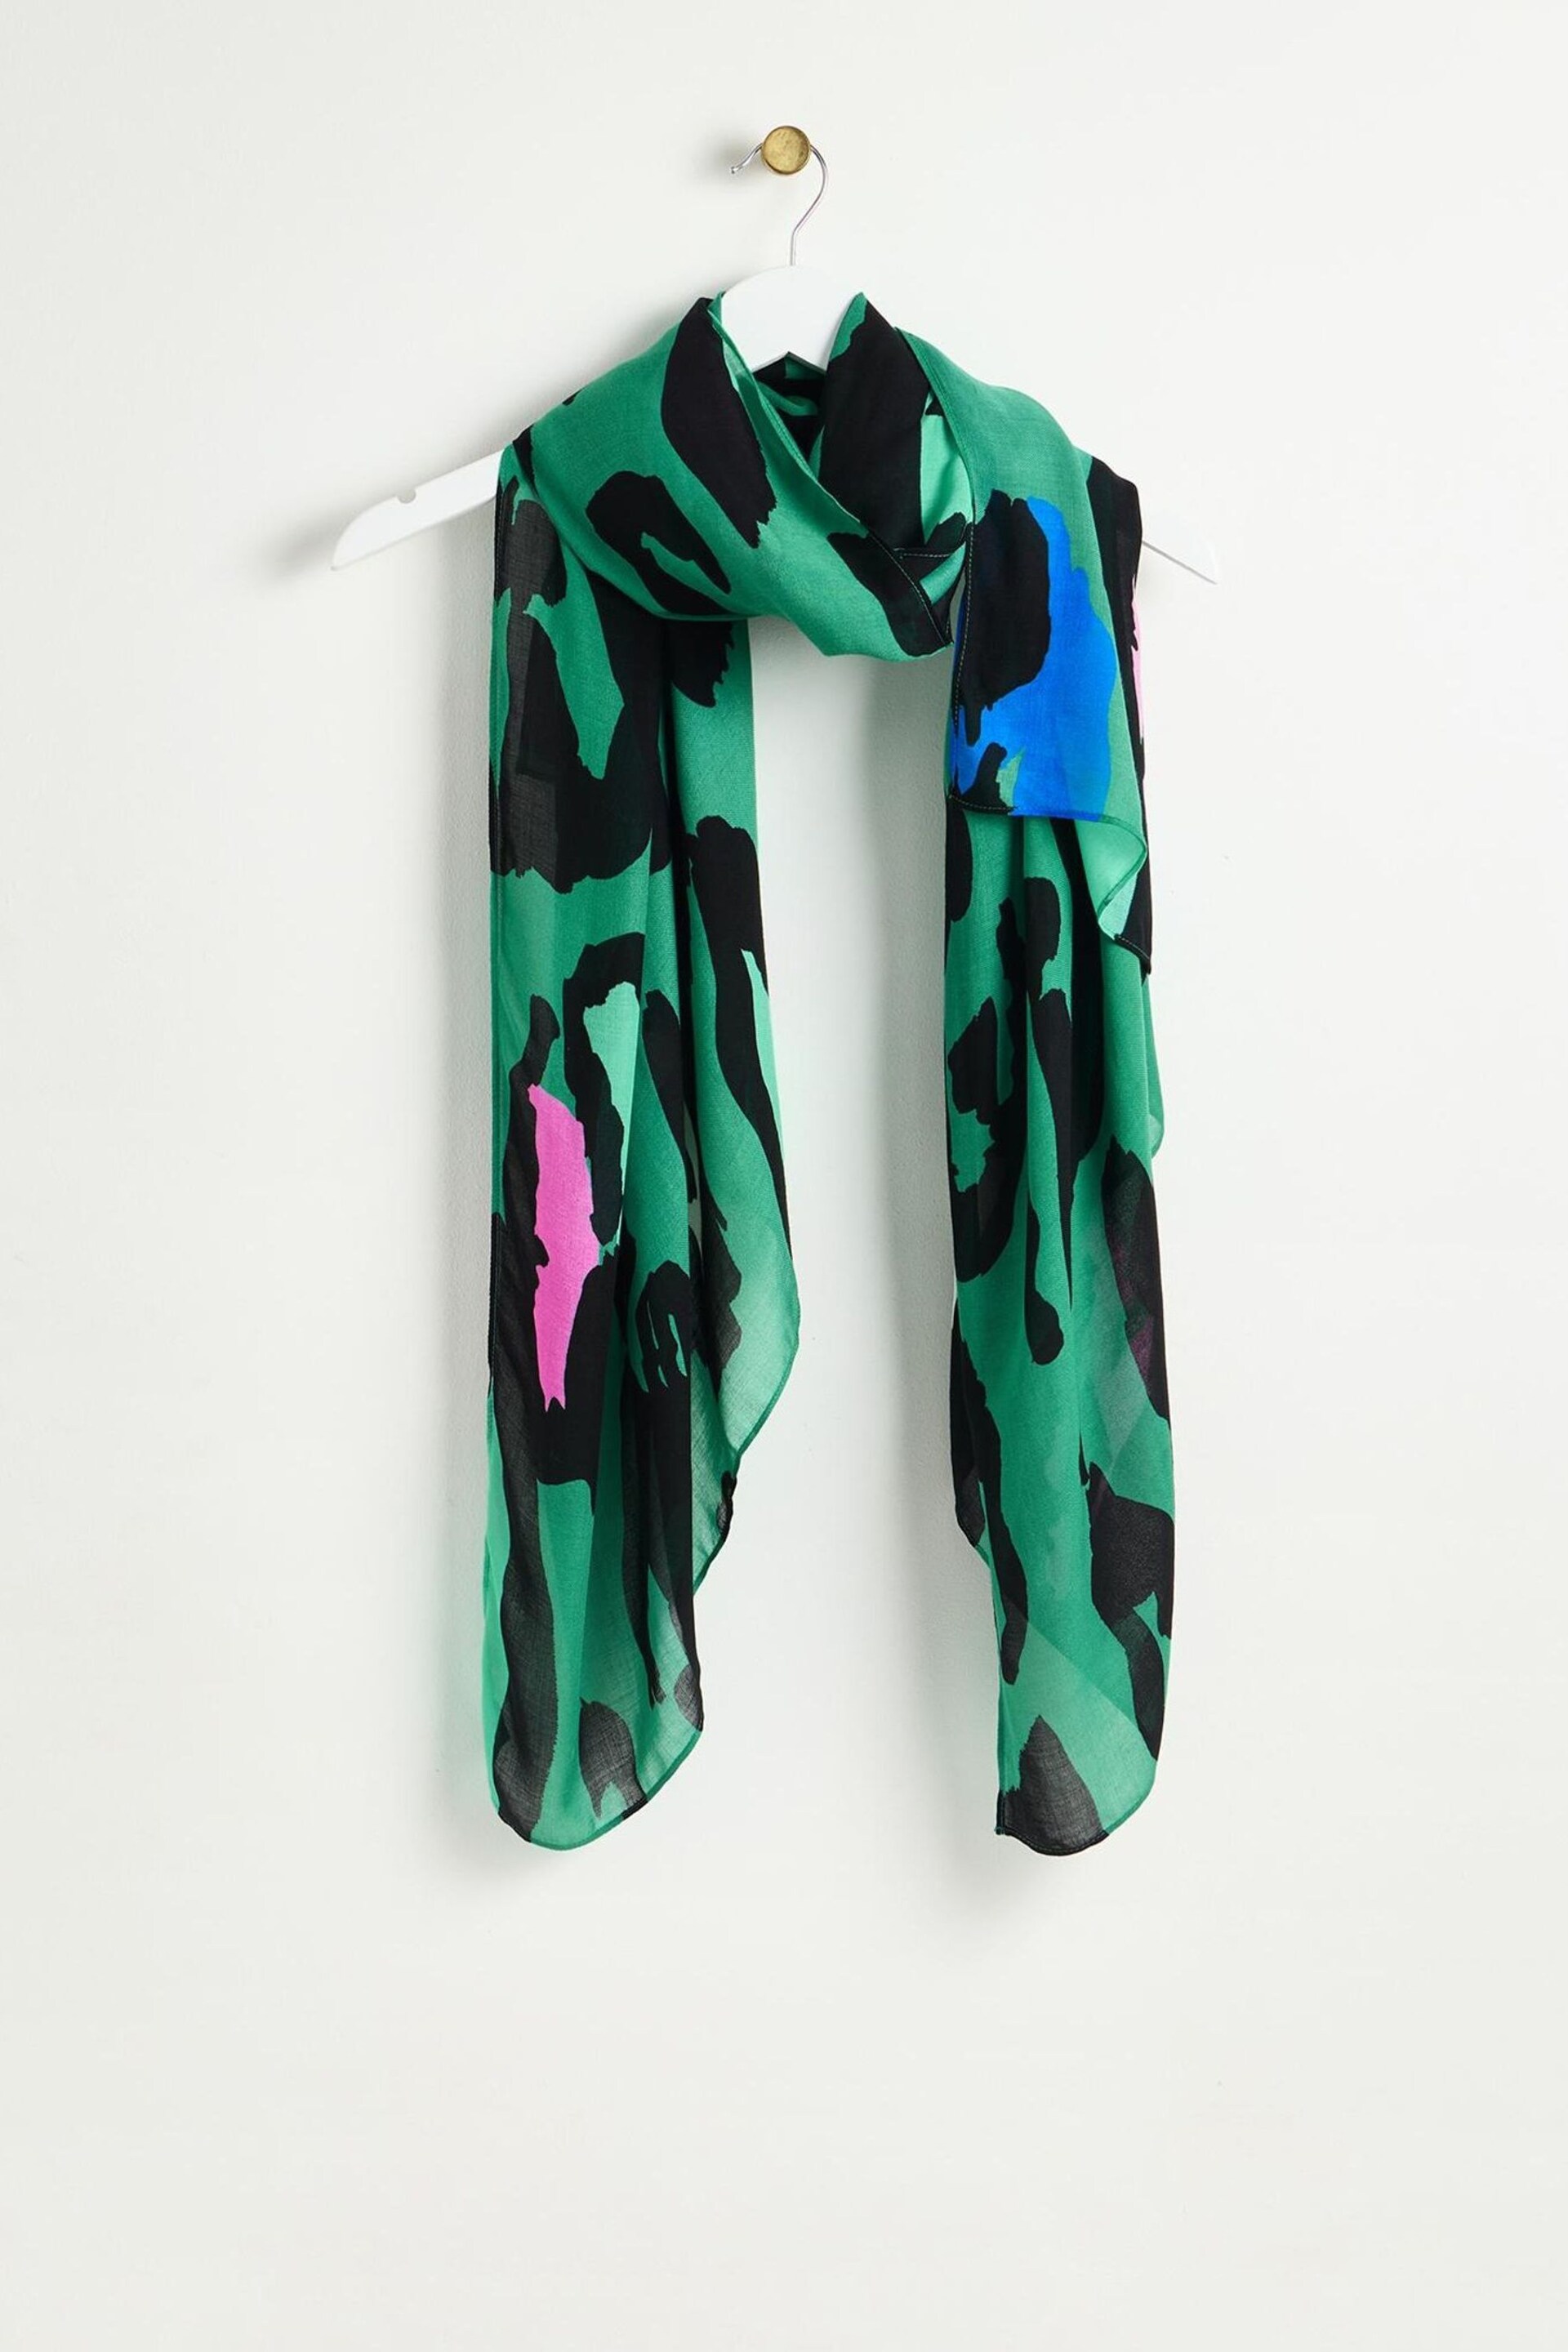 Oliver Bonas Green Oversized Abstract Animal Lightweight Scarf - Image 1 of 4